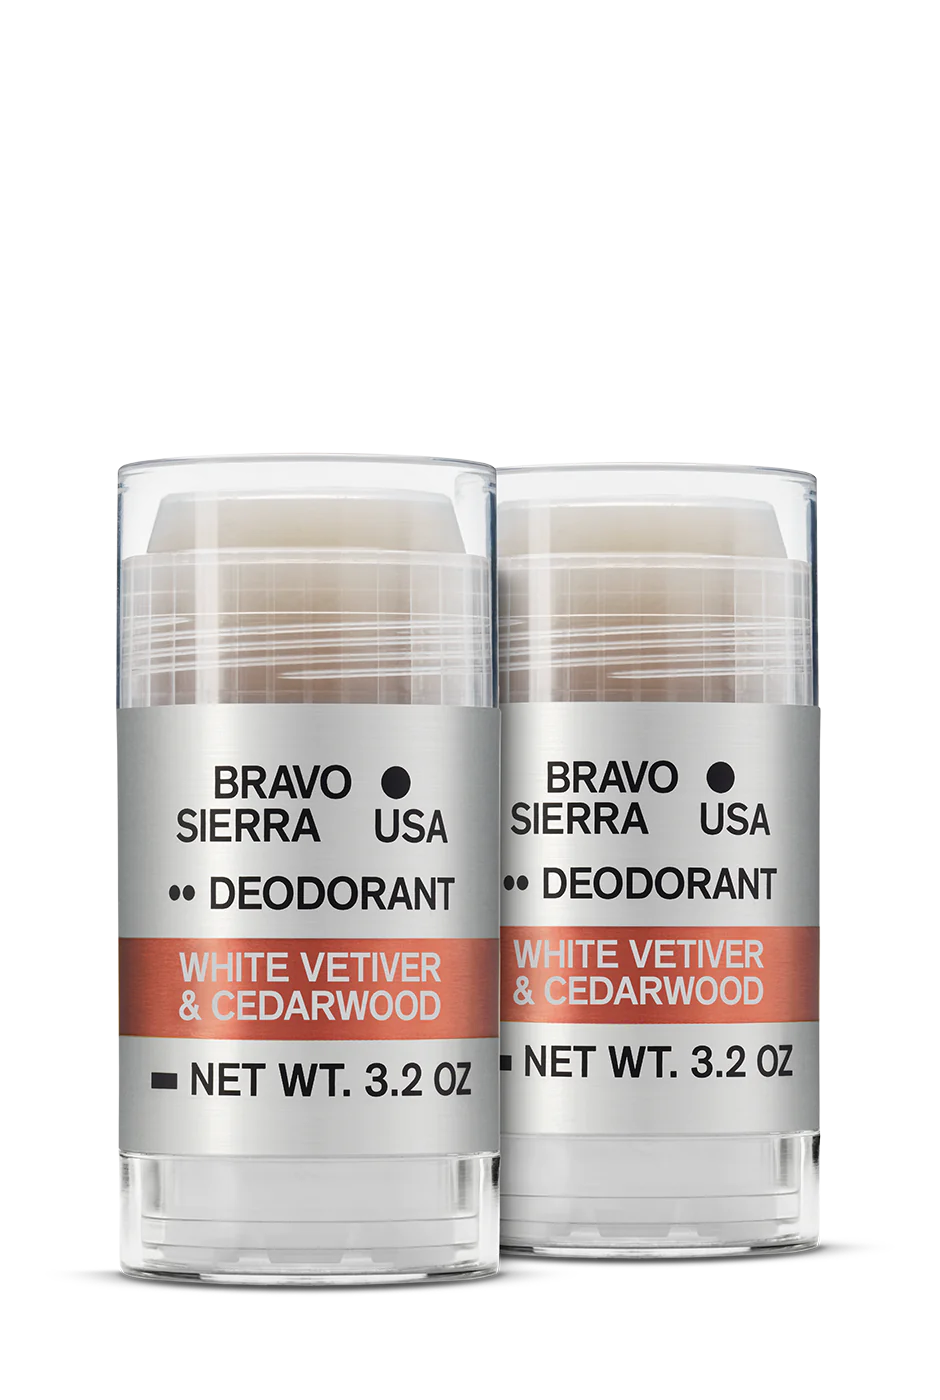 The WHITE VETIVER & CEDARWOOD DEO CLUB - 2 PACK